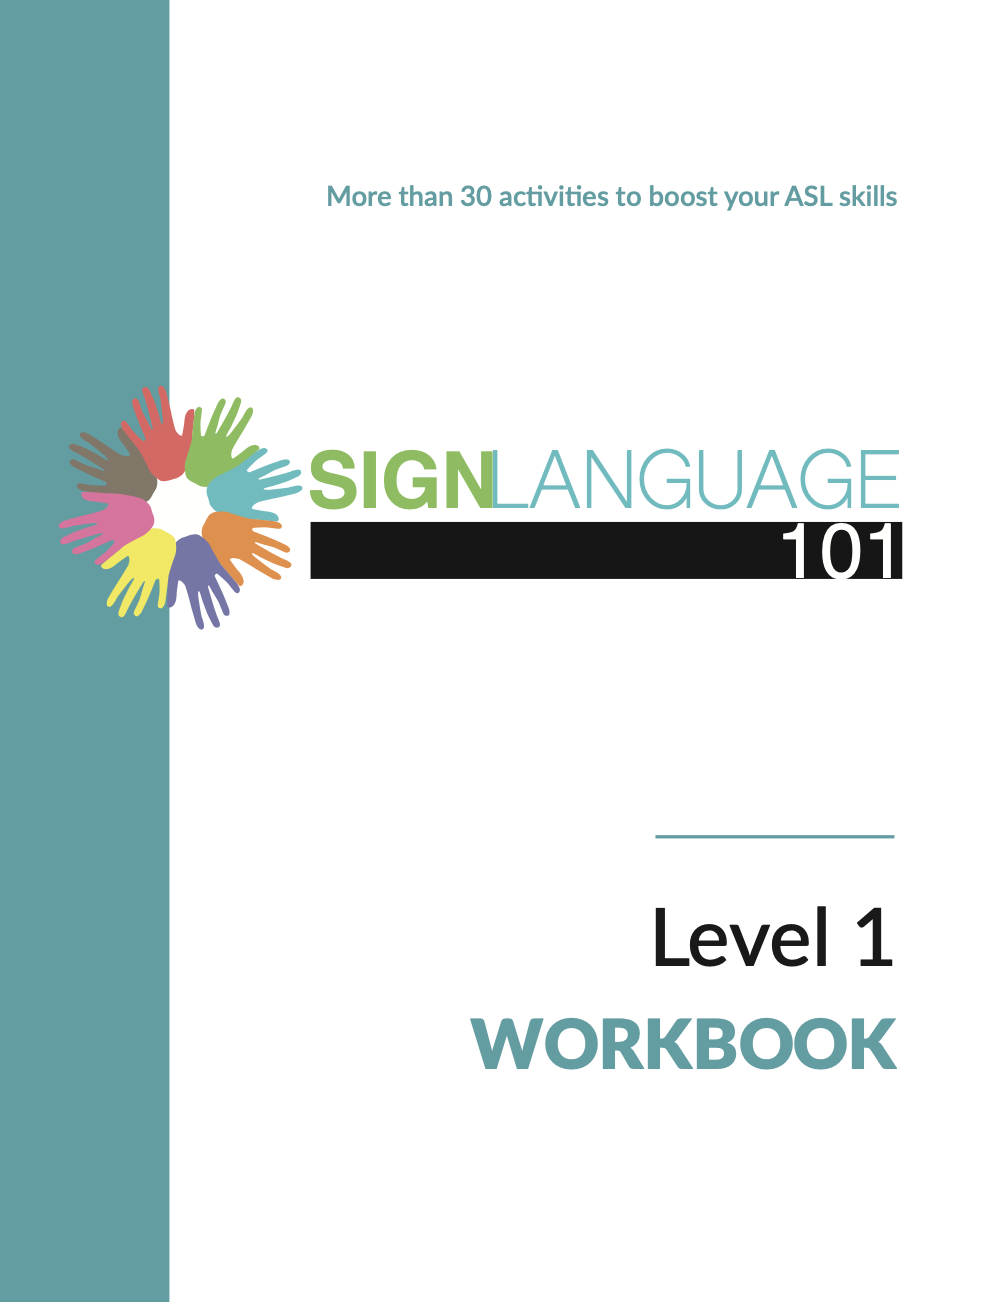 Cover of ASL Level 2 Course Workbook